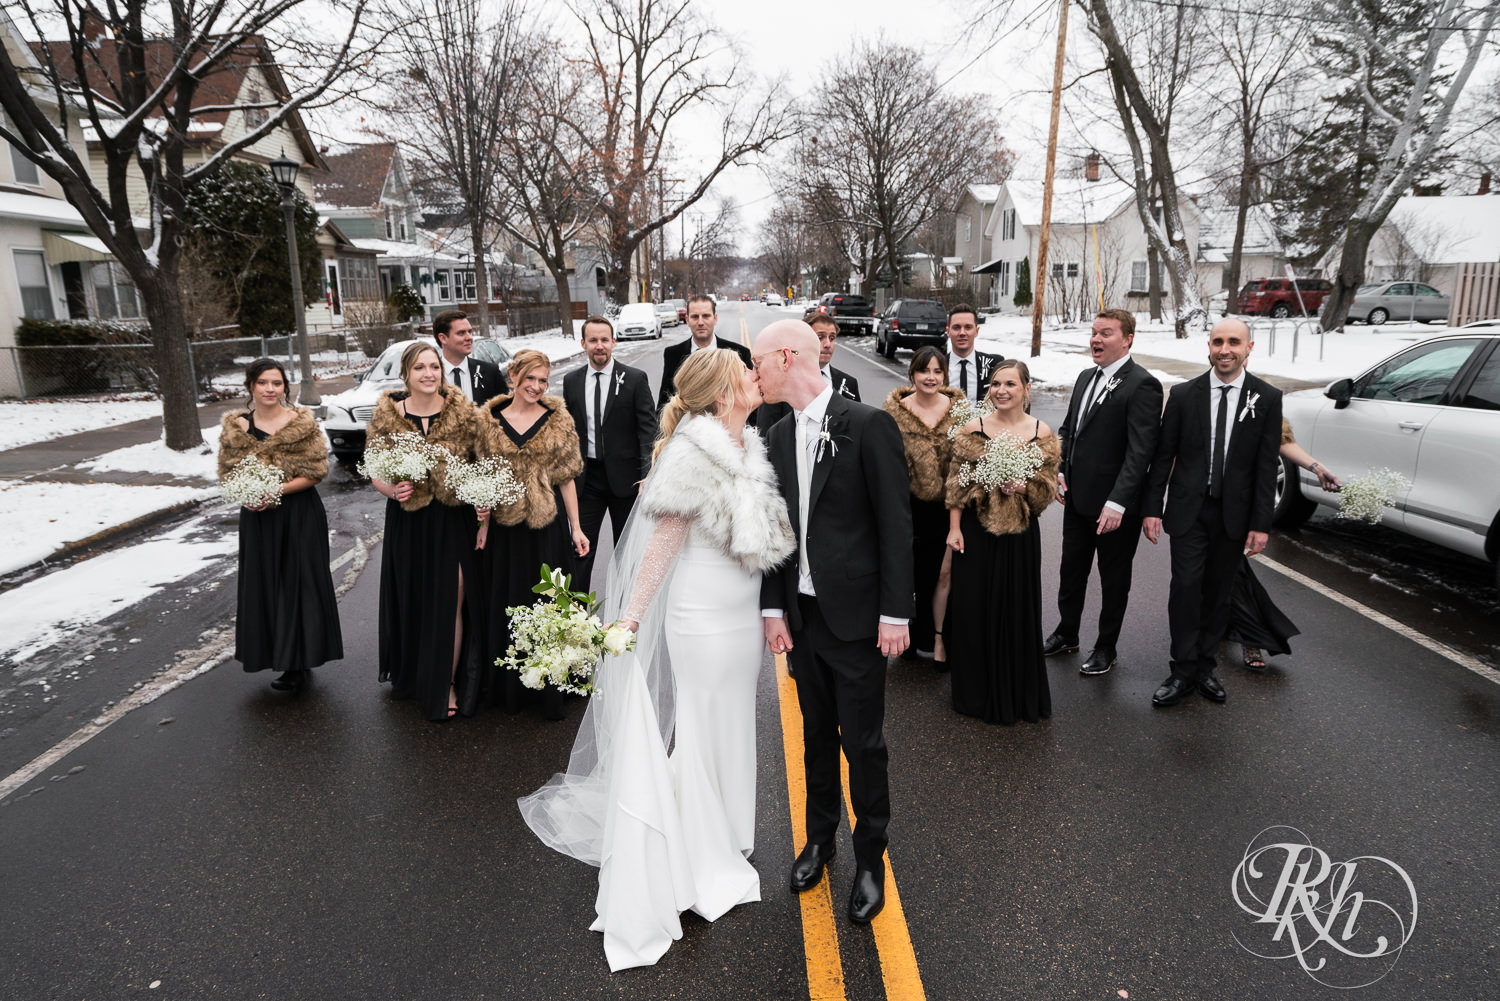 Wedding party smiles with bride and groom in the street in Saint Paul, Minnesota on winter wedding day.